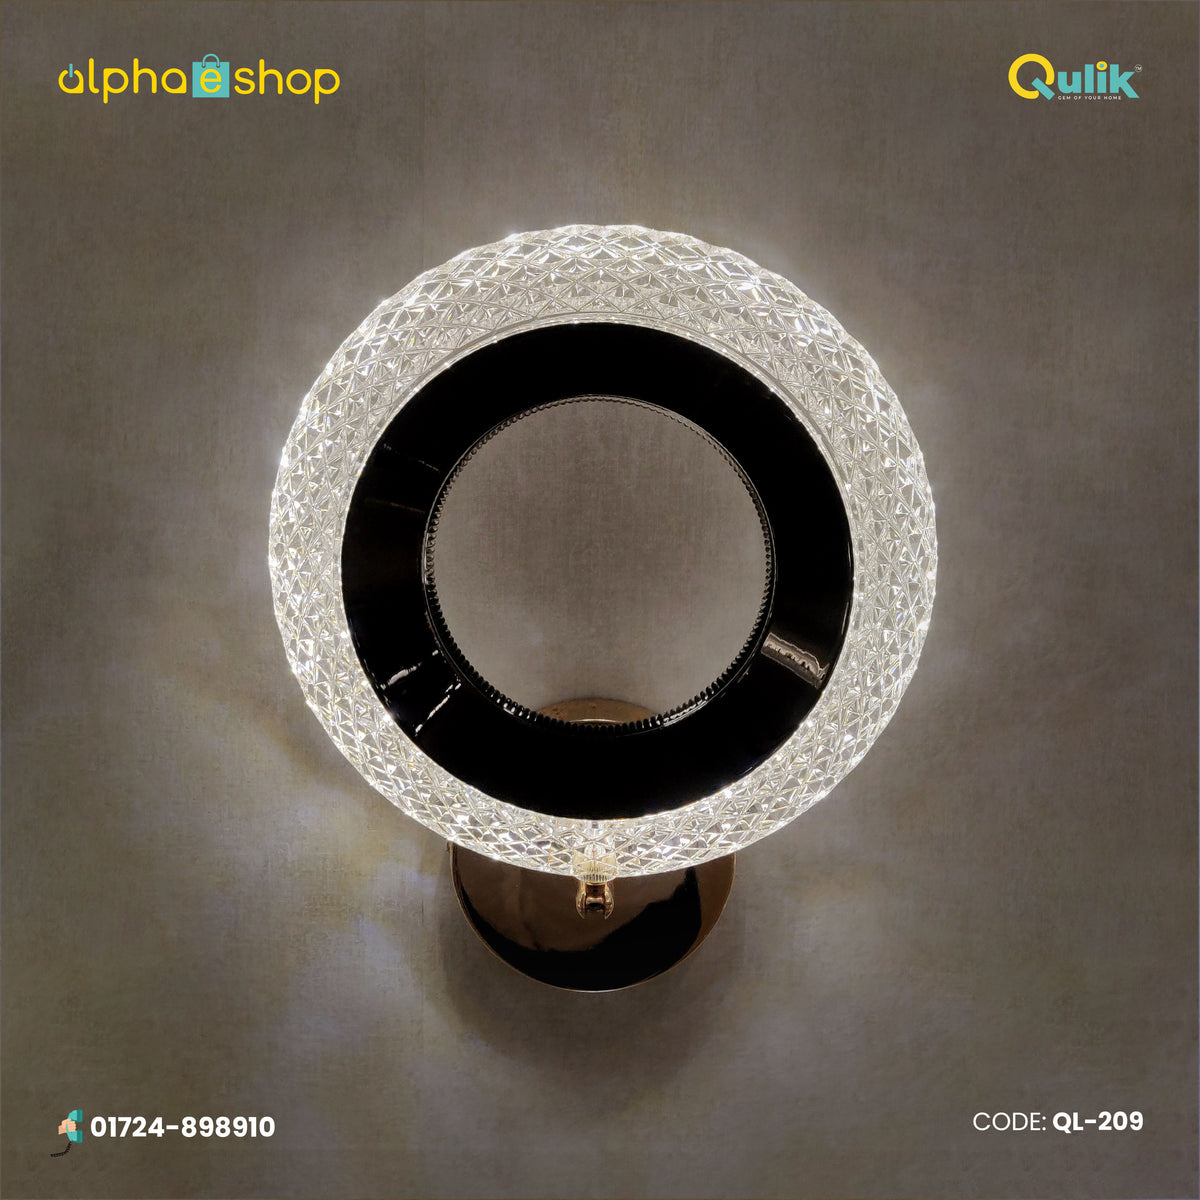 Qulik QL-209 Modern Wall Lamp - Timeless Elegance, Copper Body, Adjustable Lighting, 2-Year Warranty. Illuminate your space with enduring style and versatile lighting.